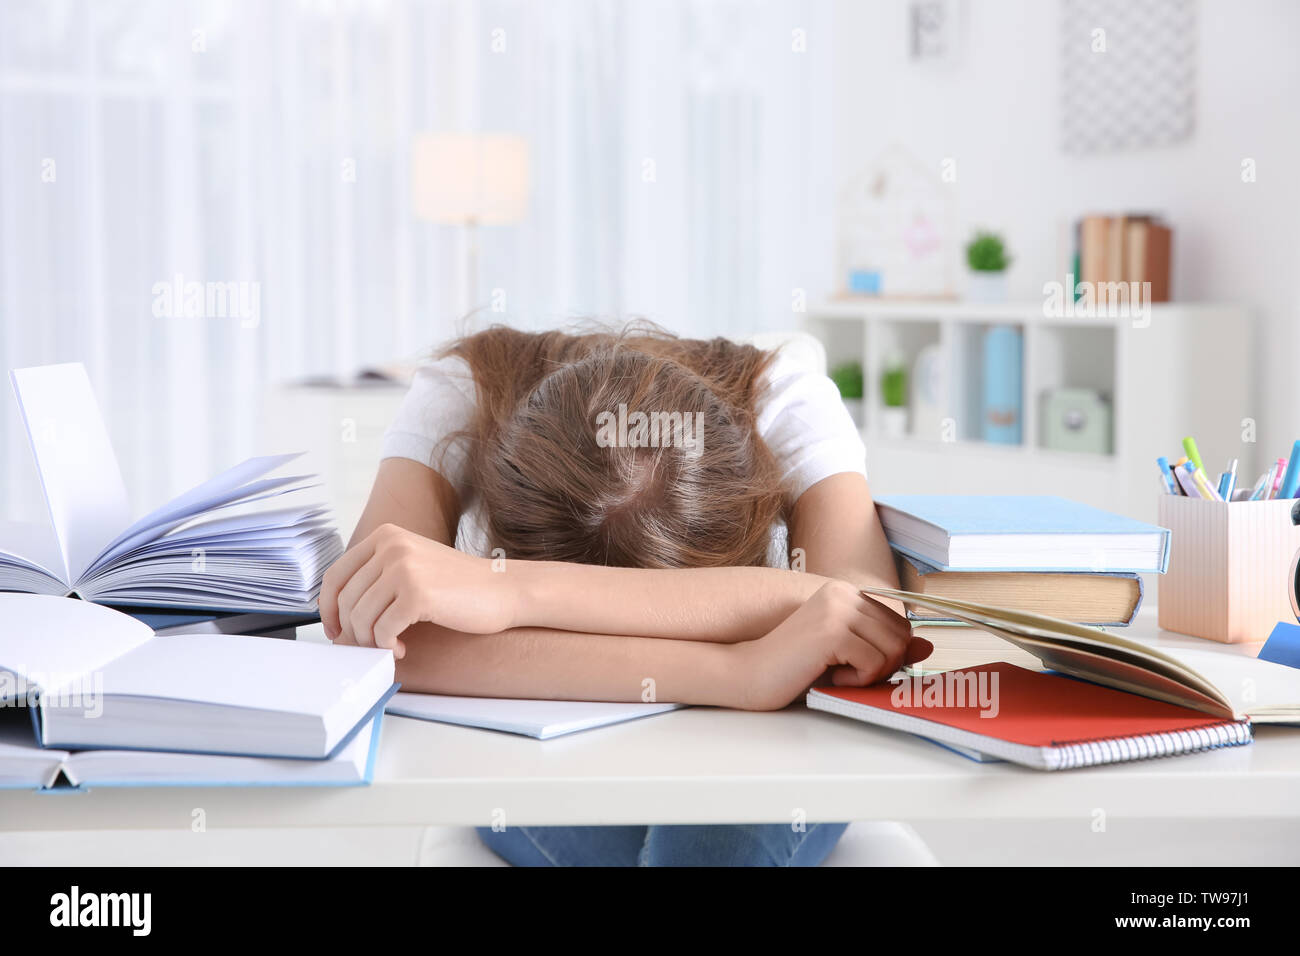 Tired student sleeping at her desk. Preparing for exam Stock Photo